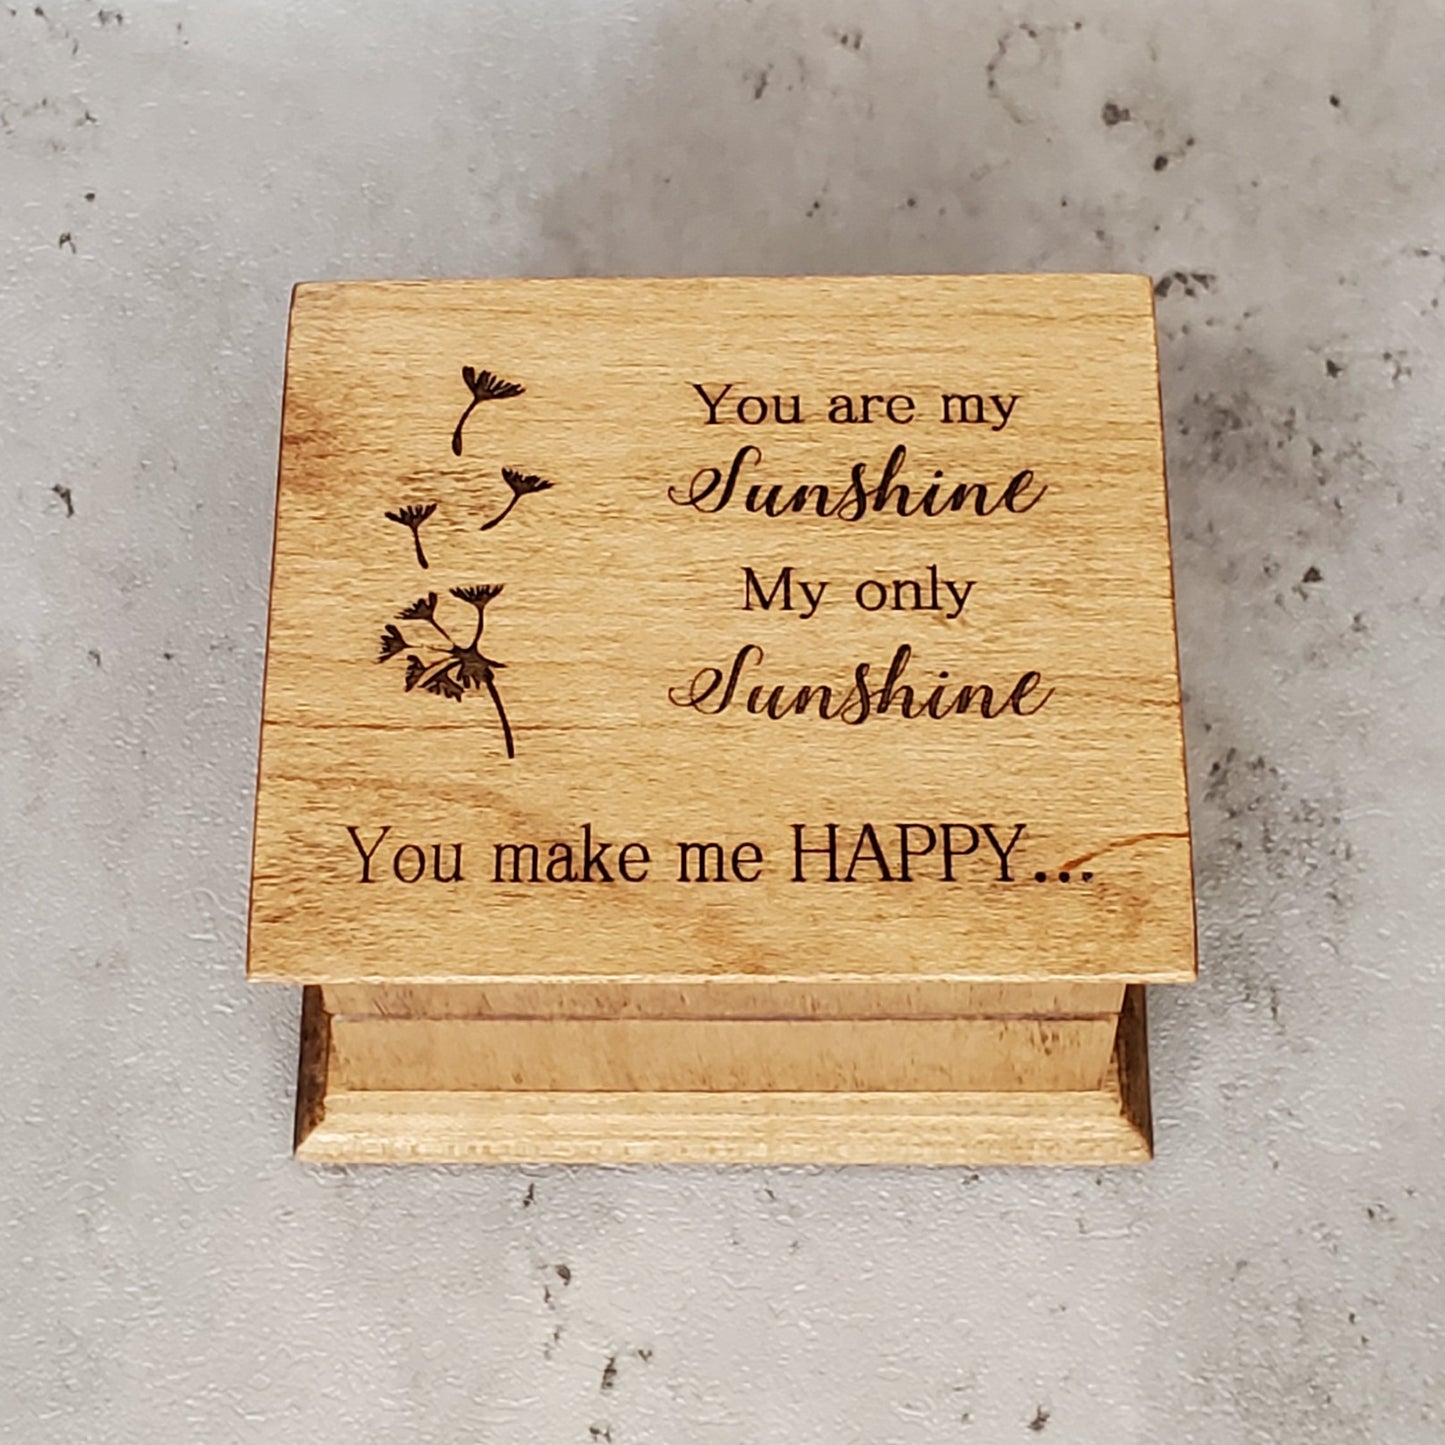 You are my sunshine My only Sunshine, You make me happy quote engraved on top along with dandelion flying